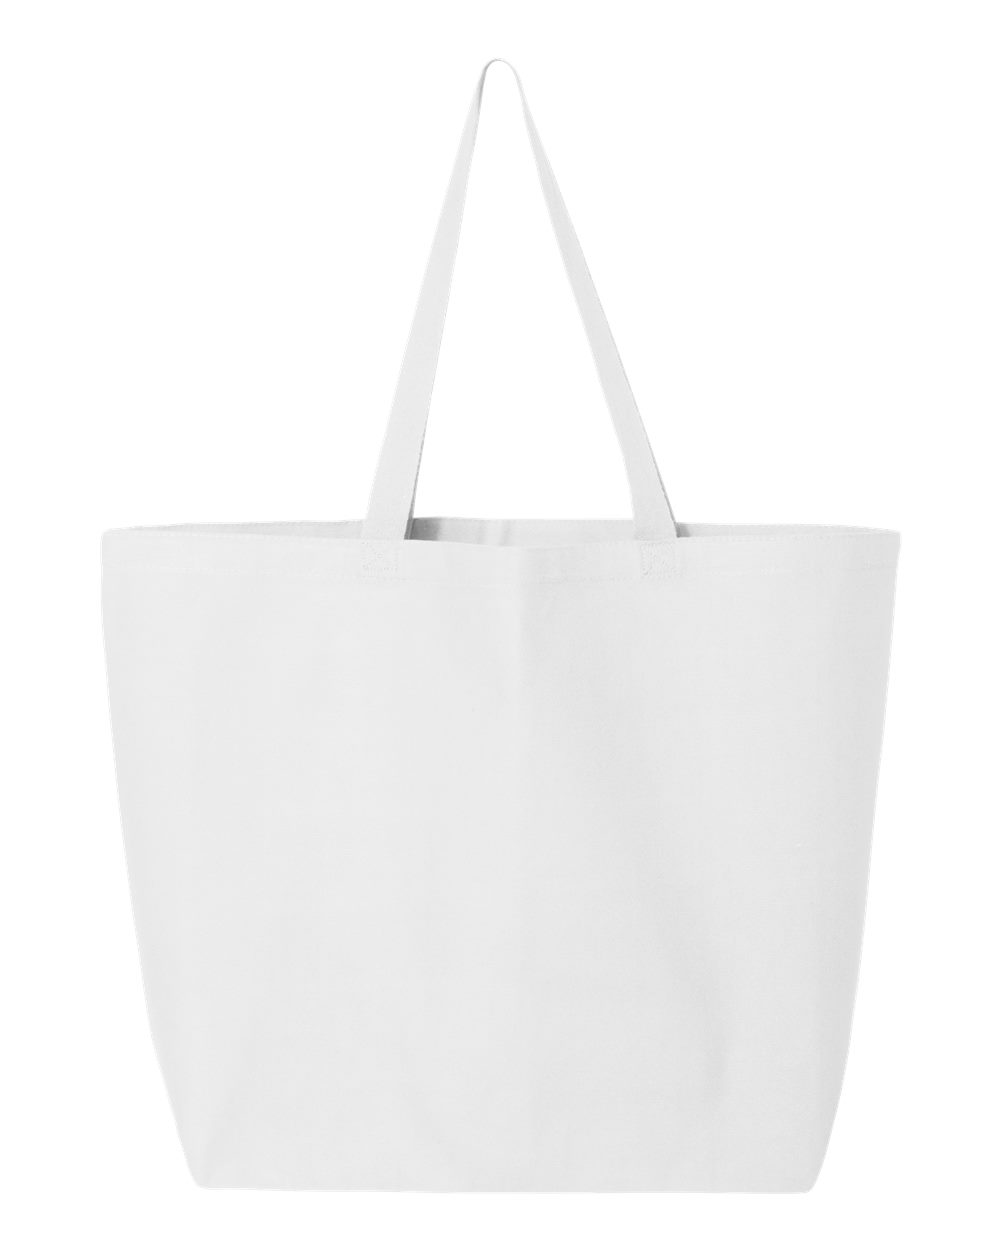 Details about   Q-Tees 25Lt Jumbo Canvas Tote Shopping Bag Beach Q600 up to 20x15x5 